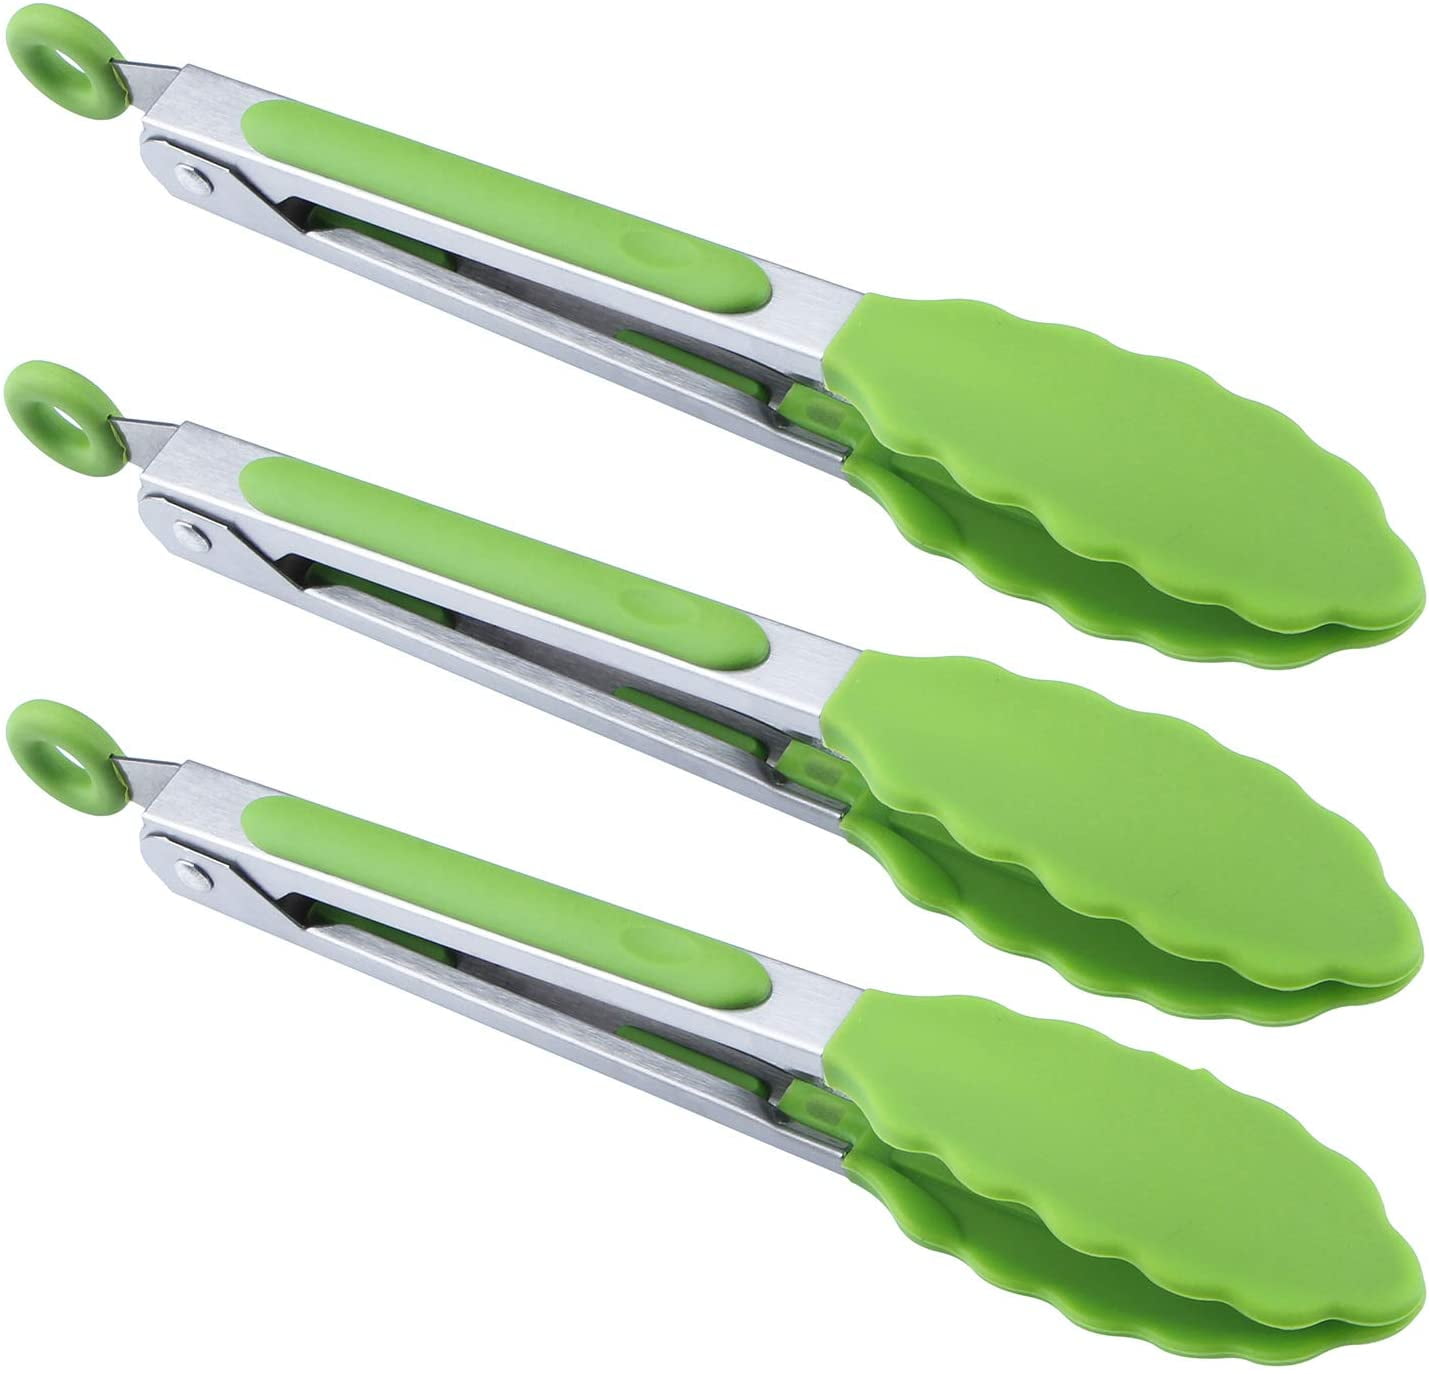 Kitchen Tong Set Silicone Tips Non-Stick Cooking Tongs 3pcs Green